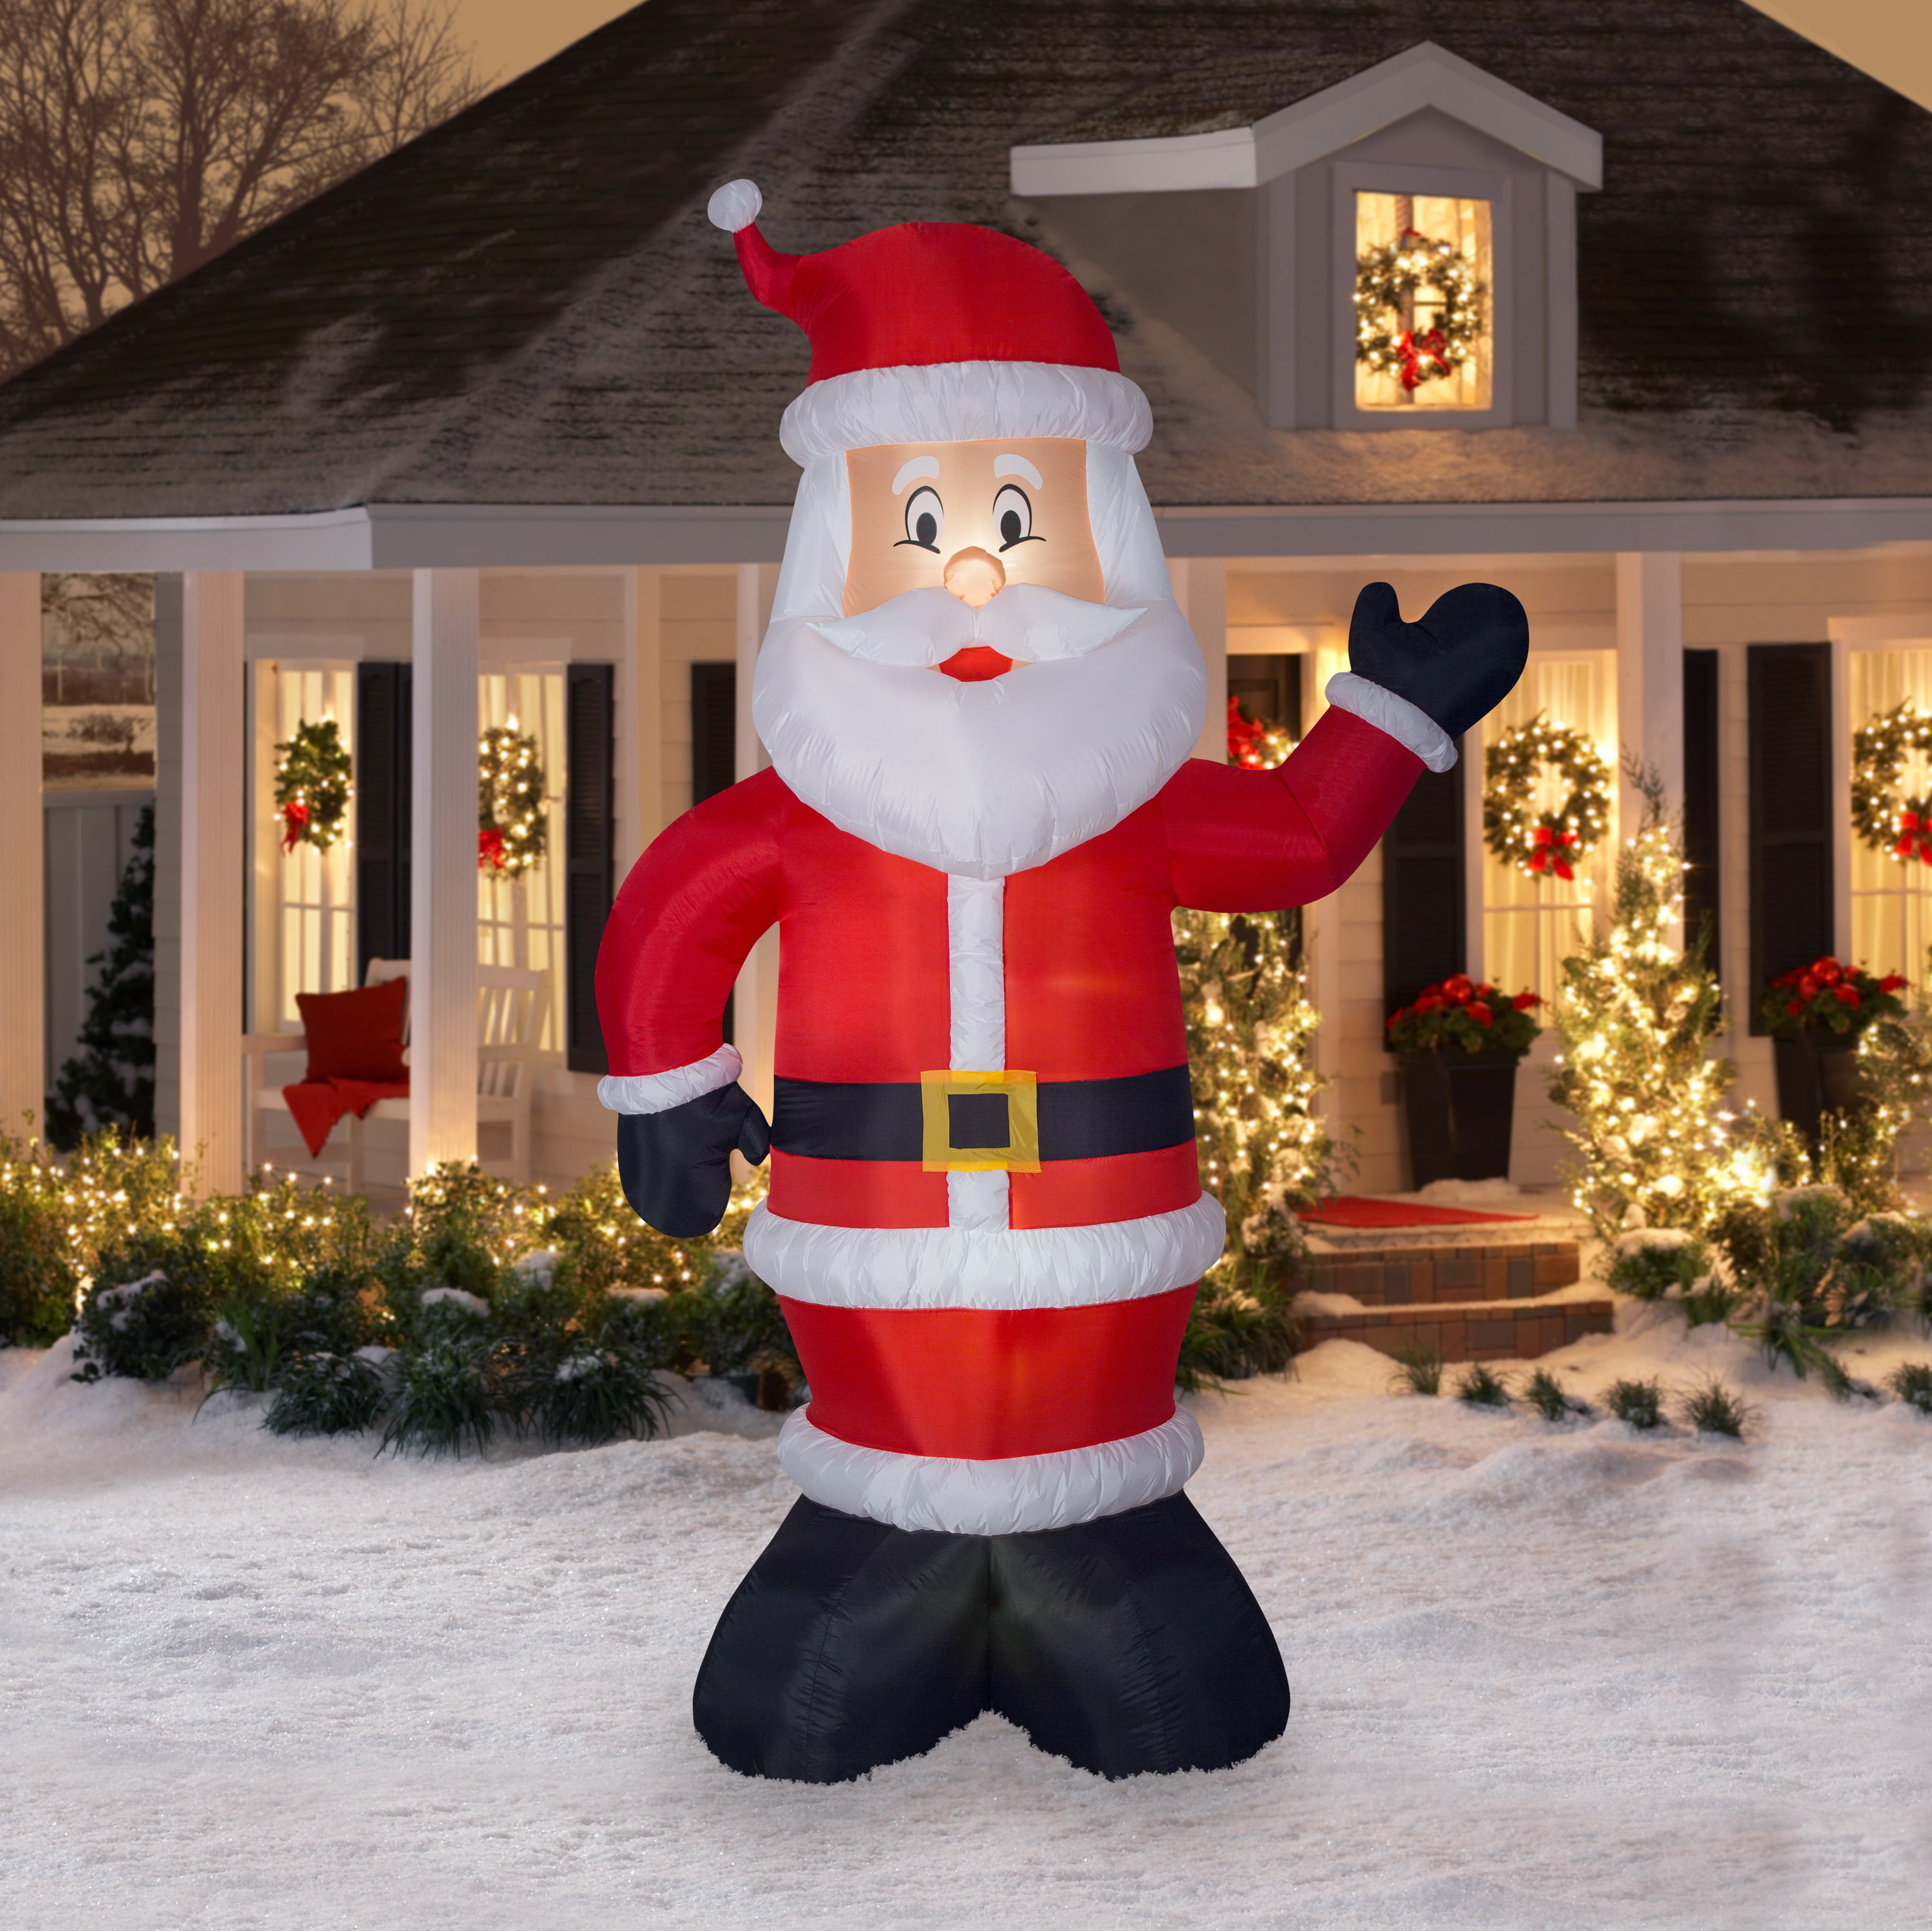 The 7 Horniest Christmas Decorations - The Jerry Bees Blog